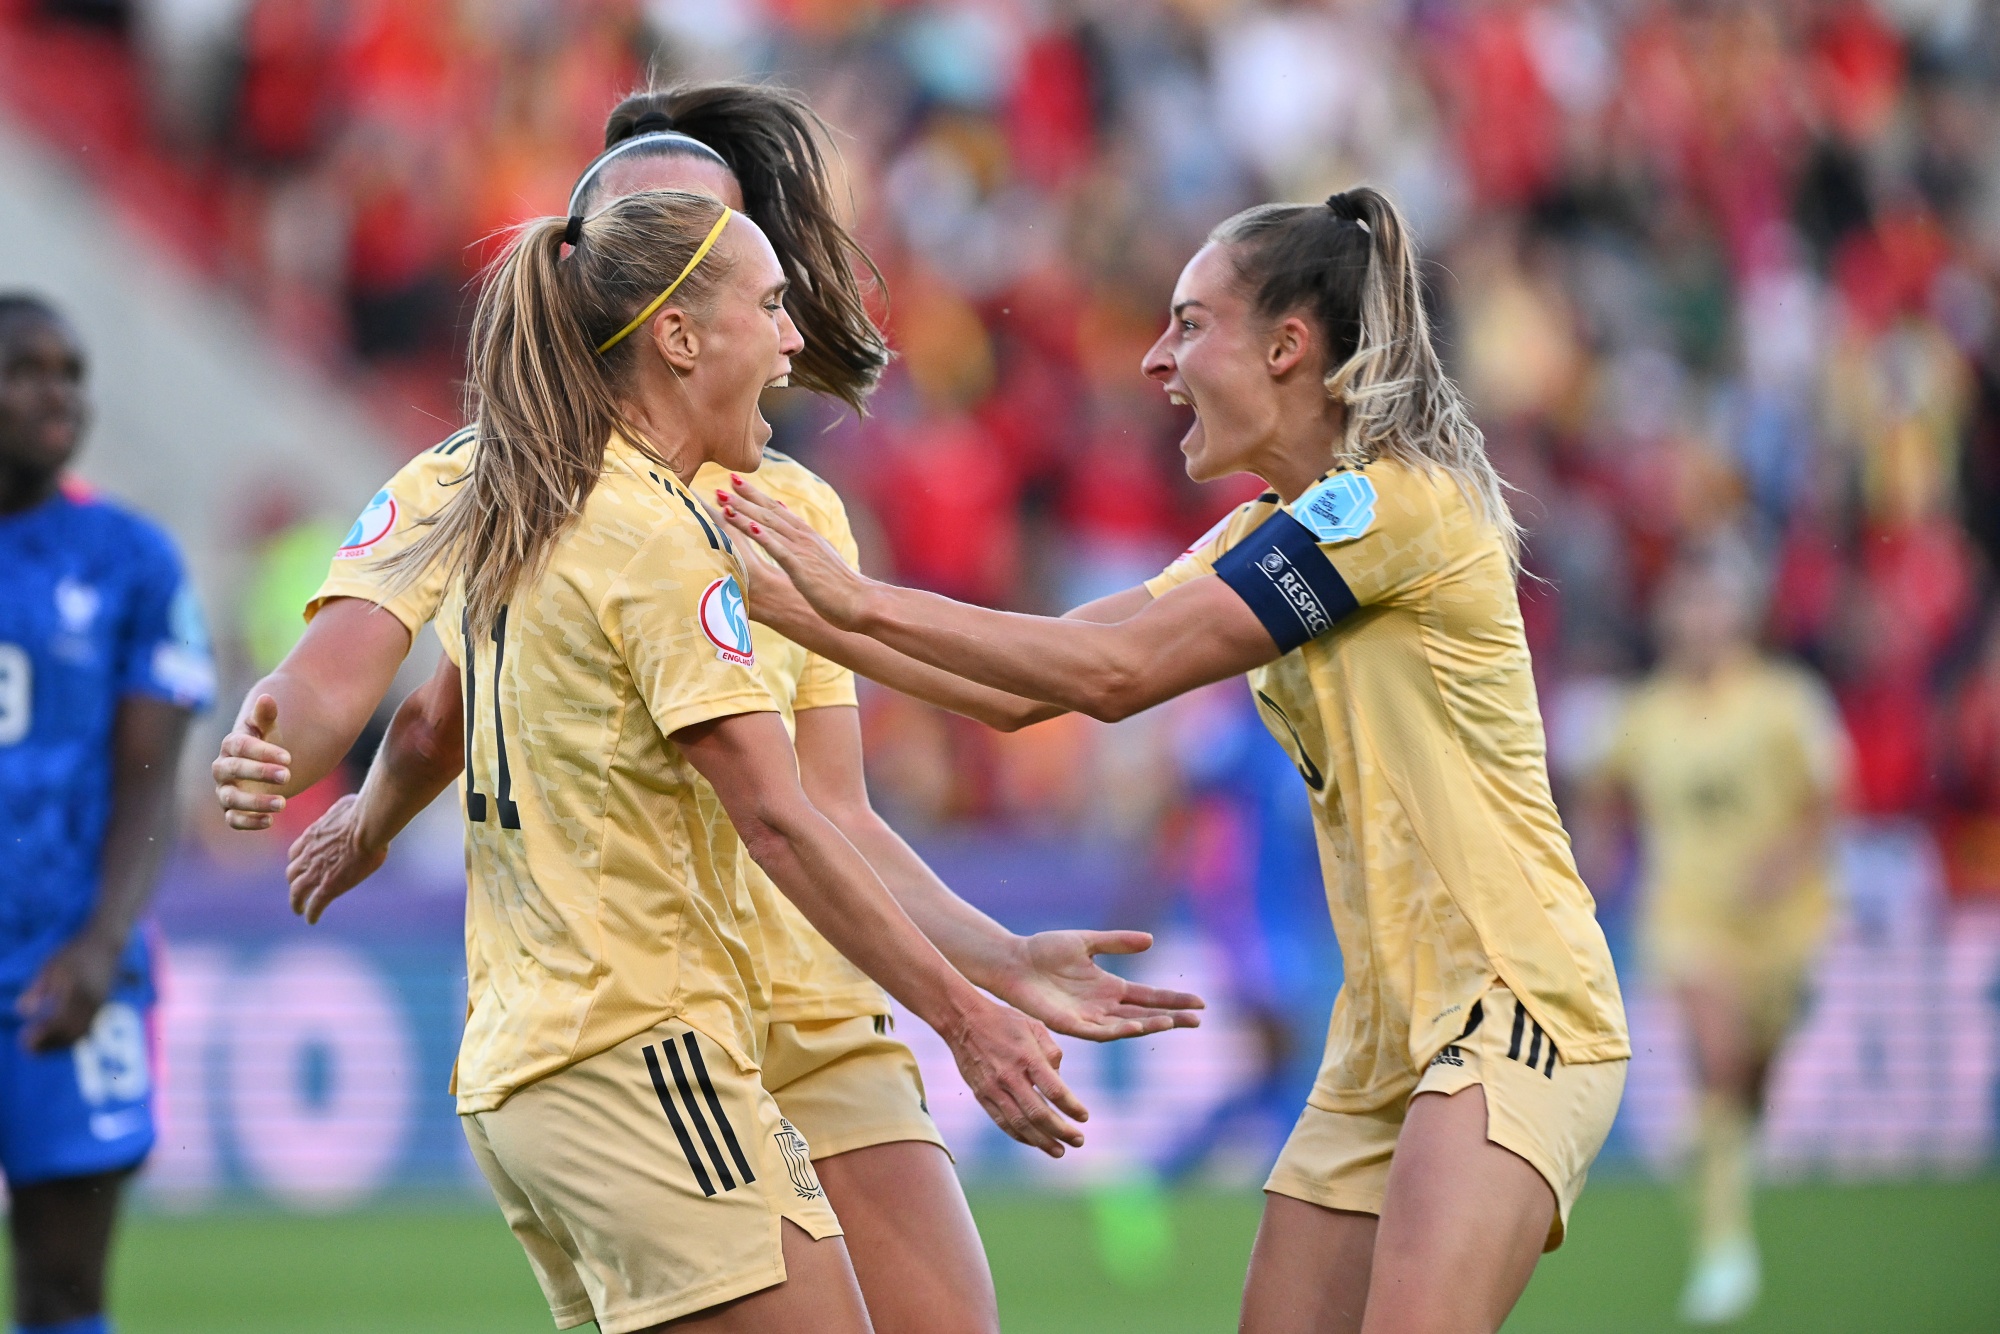 Belgium's Janice Cayman and Belgium's Tessa Wullaert celebrate after scoring during a game between Belgium's national women's soccer team the Red Flames and France, in Rotherham, England on Thursday 14 July 2022, second game in the group D at the Women's Euro 2022 tournament. The 2022 UEFA European Women's Football Championship is taking place from 6 to 31 July. BELGA PHOTO DAVID CATRY